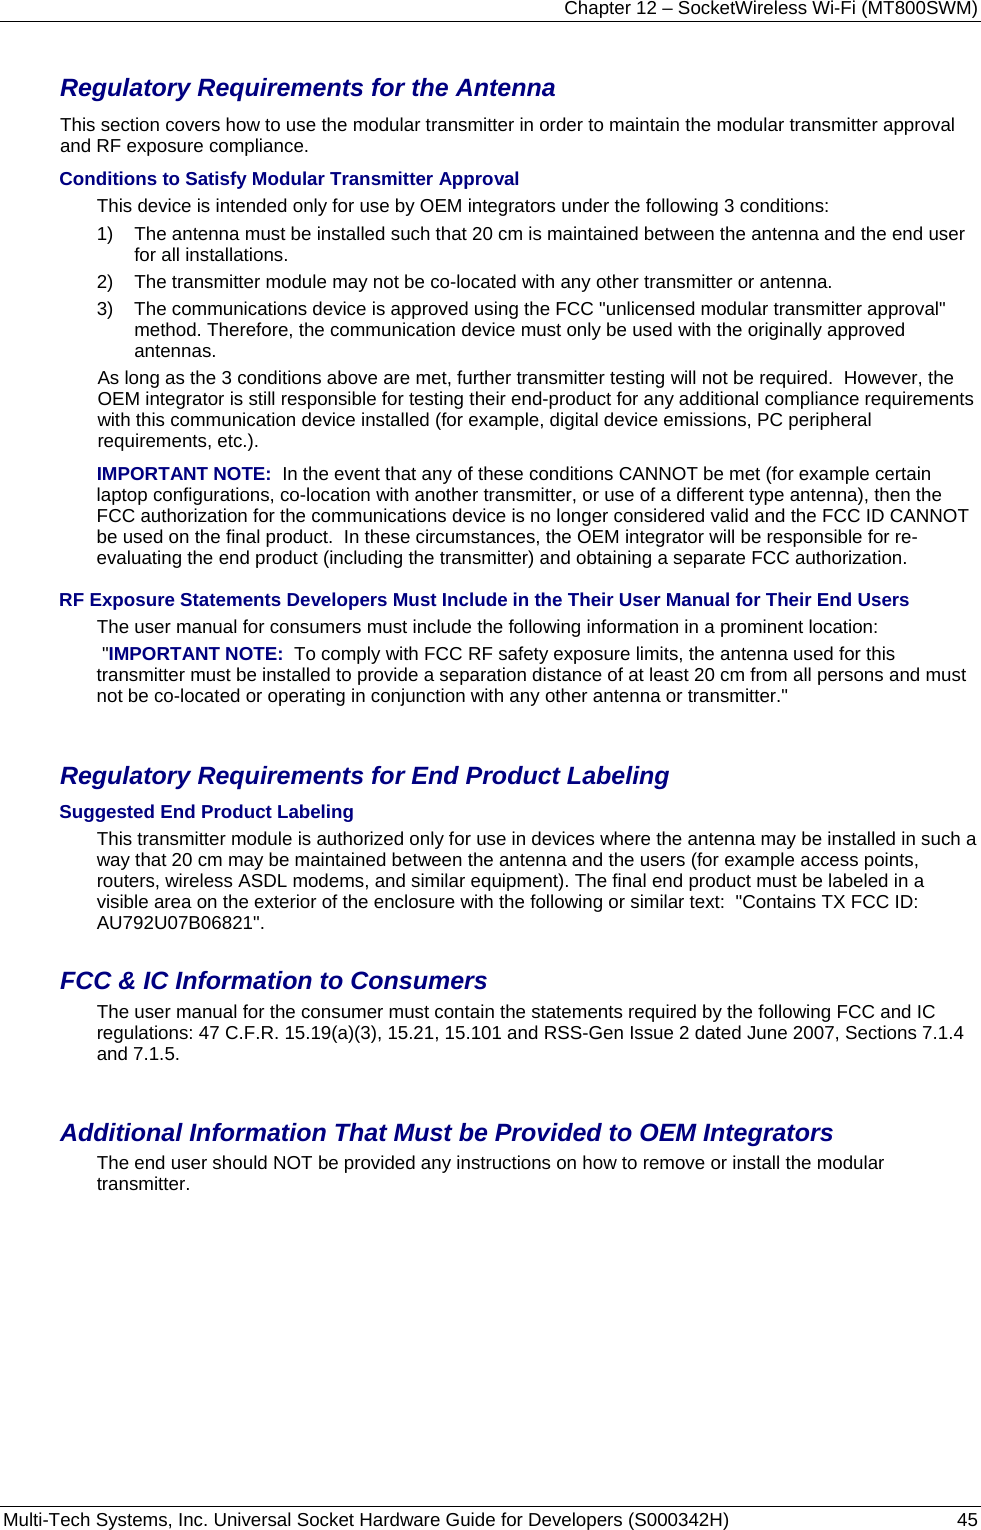 Chapter 12 – SocketWireless Wi-Fi (MT800SWM) Multi-Tech Systems, Inc. Universal Socket Hardware Guide for Developers (S000342H)  45  Regulatory Requirements for the Antenna This section covers how to use the modular transmitter in order to maintain the modular transmitter approval and RF exposure compliance.   Conditions to Satisfy Modular Transmitter Approval  This device is intended only for use by OEM integrators under the following 3 conditions:   1)    The antenna must be installed such that 20 cm is maintained between the antenna and the end user for all installations.   2)    The transmitter module may not be co-located with any other transmitter or antenna.   3)   The communications device is approved using the FCC &quot;unlicensed modular transmitter approval&quot; method. Therefore, the communication device must only be used with the originally approved antennas.   As long as the 3 conditions above are met, further transmitter testing will not be required.  However, the OEM integrator is still responsible for testing their end-product for any additional compliance requirements with this communication device installed (for example, digital device emissions, PC peripheral requirements, etc.).   IMPORTANT NOTE:  In the event that any of these conditions CANNOT be met (for example certain laptop configurations, co-location with another transmitter, or use of a different type antenna), then the FCC authorization for the communications device is no longer considered valid and the FCC ID CANNOT be used on the final product.  In these circumstances, the OEM integrator will be responsible for re-evaluating the end product (including the transmitter) and obtaining a separate FCC authorization.   RF Exposure Statements Developers Must Include in the Their User Manual for Their End Users The user manual for consumers must include the following information in a prominent location:  &quot;IMPORTANT NOTE:  To comply with FCC RF safety exposure limits, the antenna used for this transmitter must be installed to provide a separation distance of at least 20 cm from all persons and must not be co-located or operating in conjunction with any other antenna or transmitter.&quot;     Regulatory Requirements for End Product Labeling Suggested End Product Labeling  This transmitter module is authorized only for use in devices where the antenna may be installed in such a way that 20 cm may be maintained between the antenna and the users (for example access points, routers, wireless ASDL modems, and similar equipment). The final end product must be labeled in a visible area on the exterior of the enclosure with the following or similar text:  &quot;Contains TX FCC ID:  AU792U07B06821&quot;.    FCC &amp; IC Information to Consumers  The user manual for the consumer must contain the statements required by the following FCC and IC regulations: 47 C.F.R. 15.19(a)(3), 15.21, 15.101 and RSS-Gen Issue 2 dated June 2007, Sections 7.1.4 and 7.1.5.      Additional Information That Must be Provided to OEM Integrators  The end user should NOT be provided any instructions on how to remove or install the modular transmitter.     